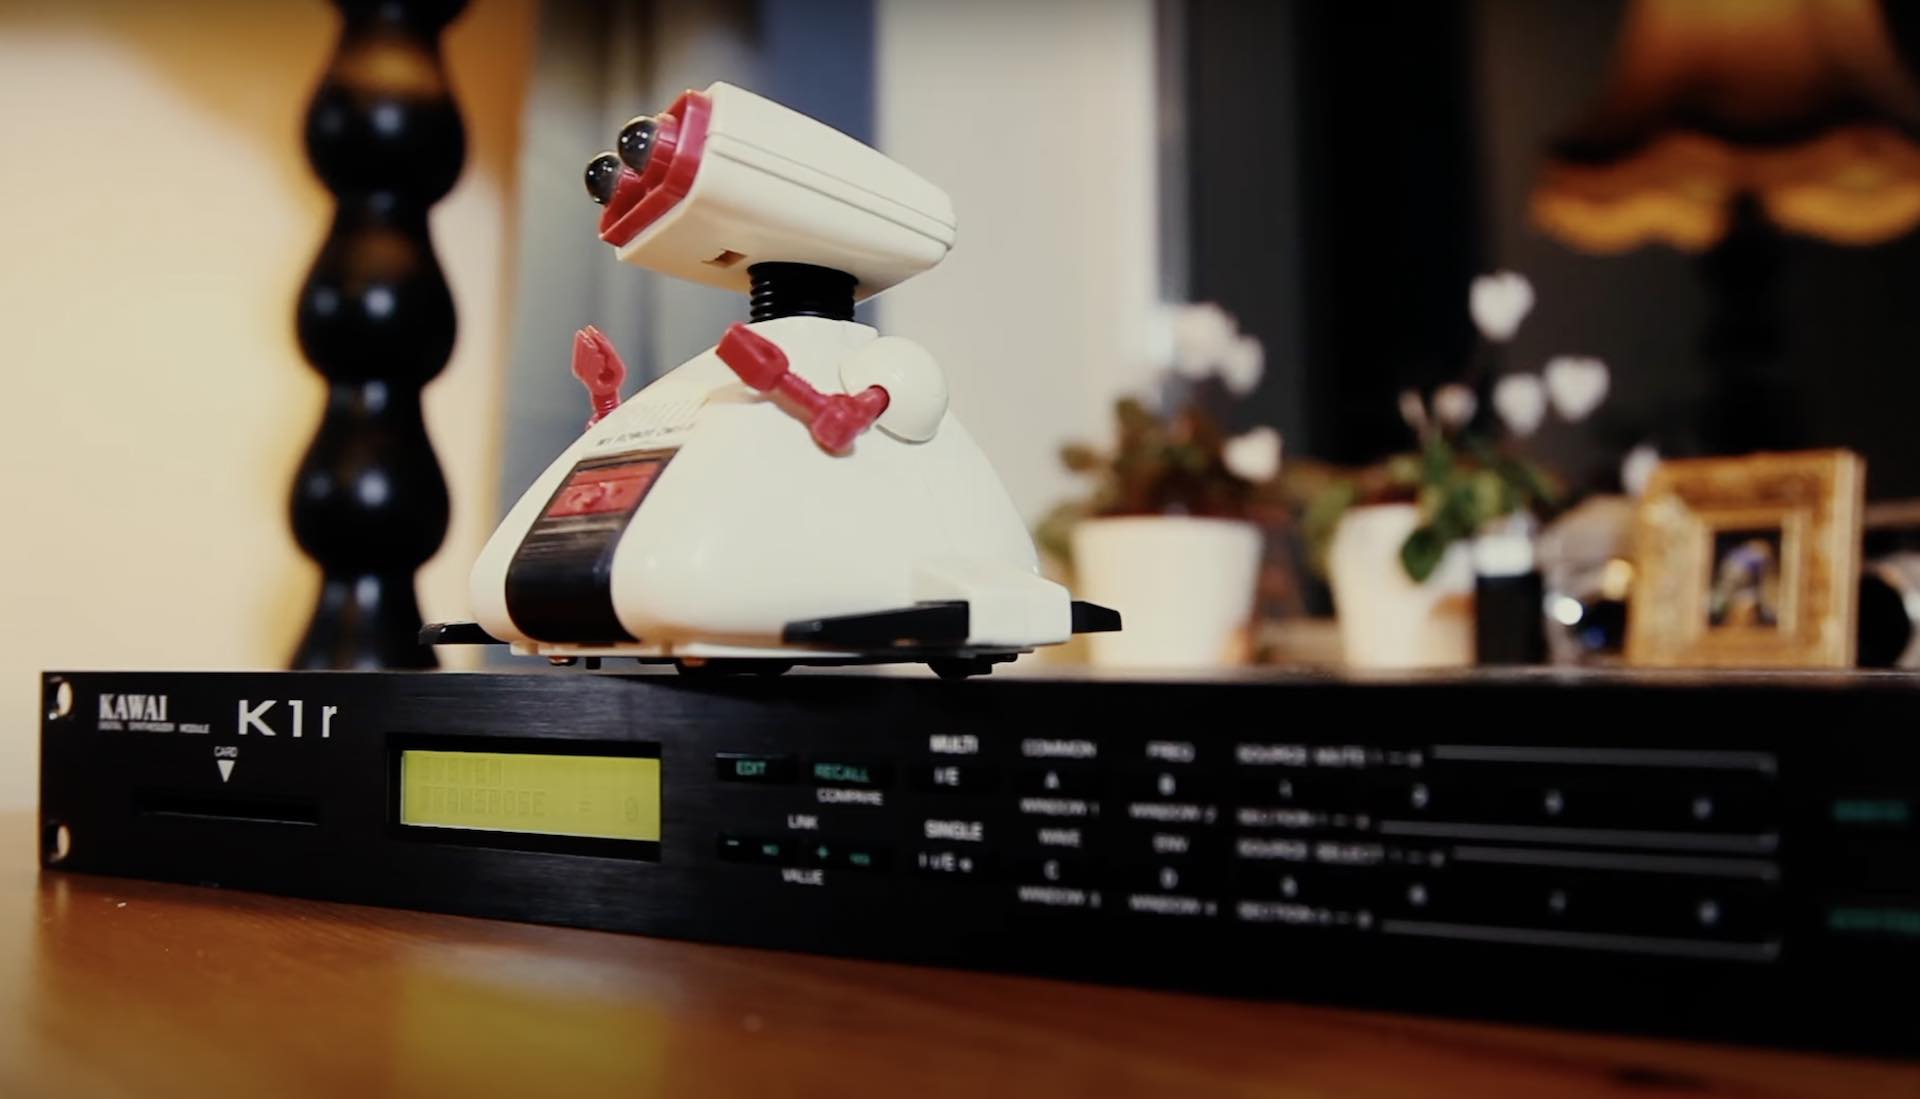 Kawai K1 synth module with a toy robot on top